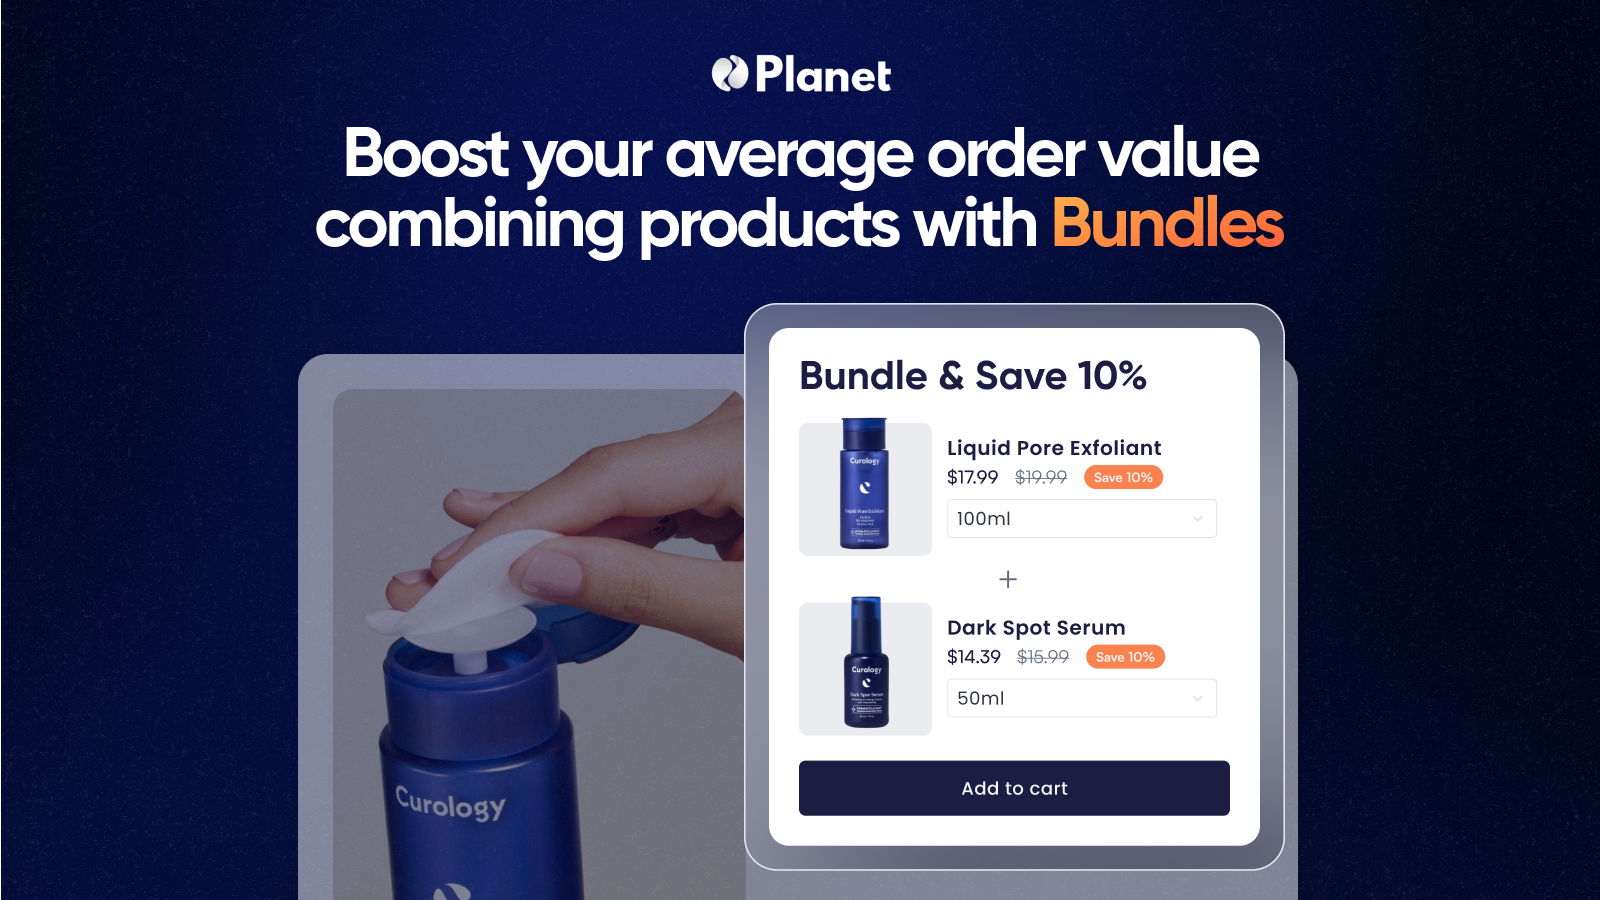 Boost your average order value with bundles